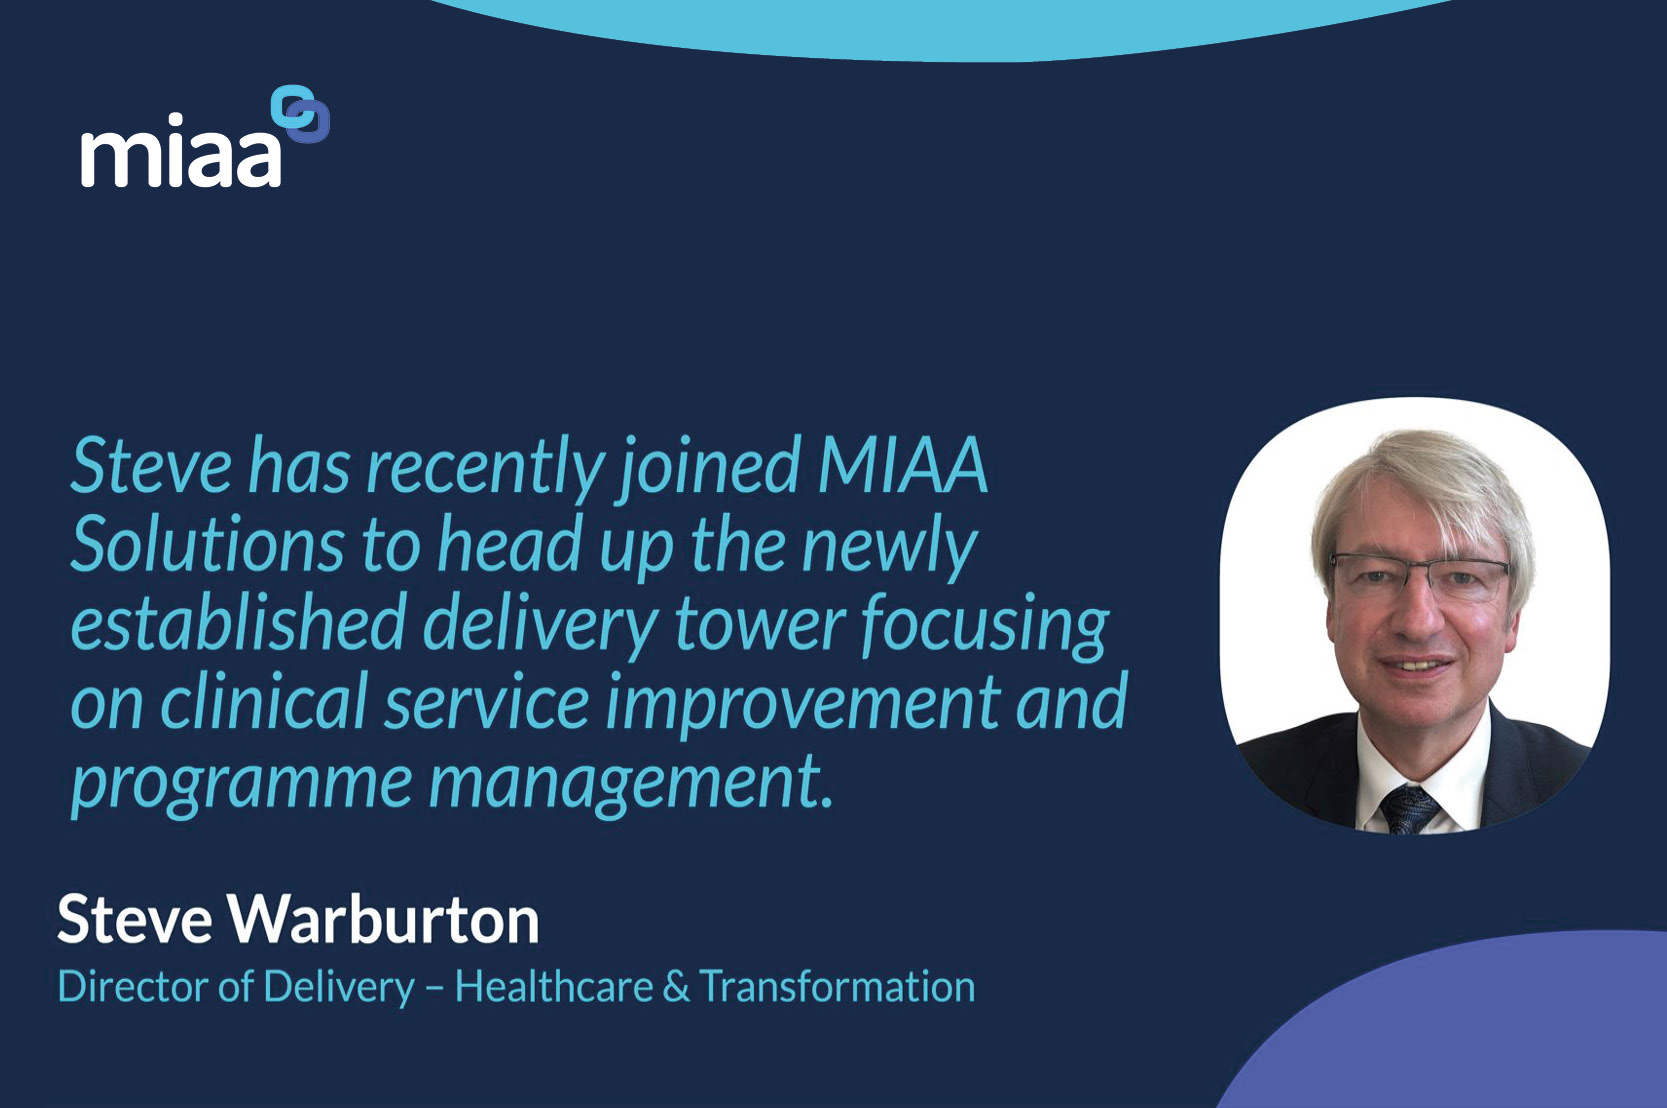 Introducing Steve Warburton - Director of Healthcare Delivery and Transformation